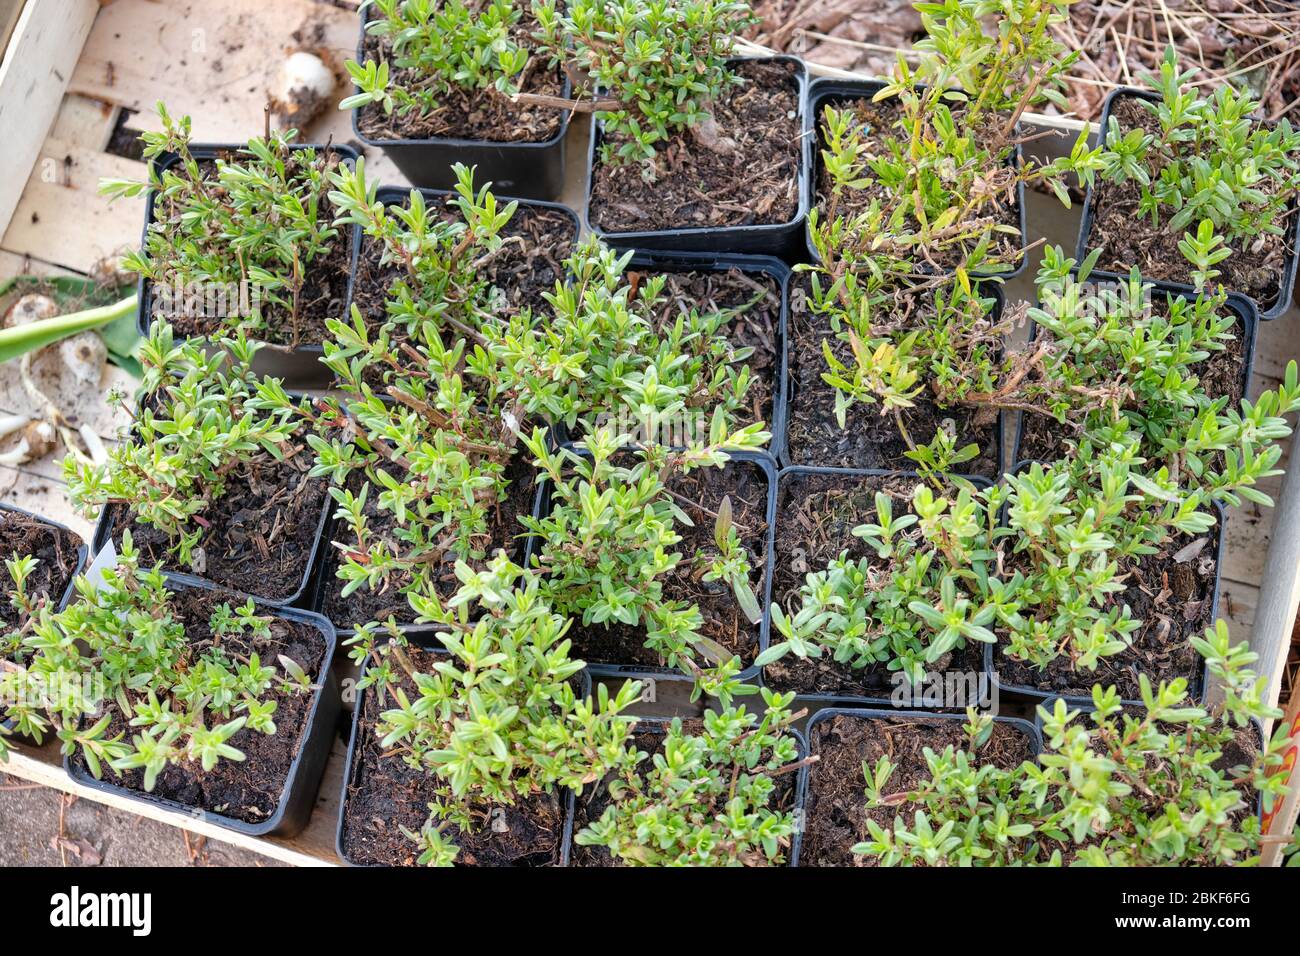 Young little hyssop plants in black plastic plant pots from the gardener ready to be planted out into the soil of a garden. Seen in Germany in April Stock Photo